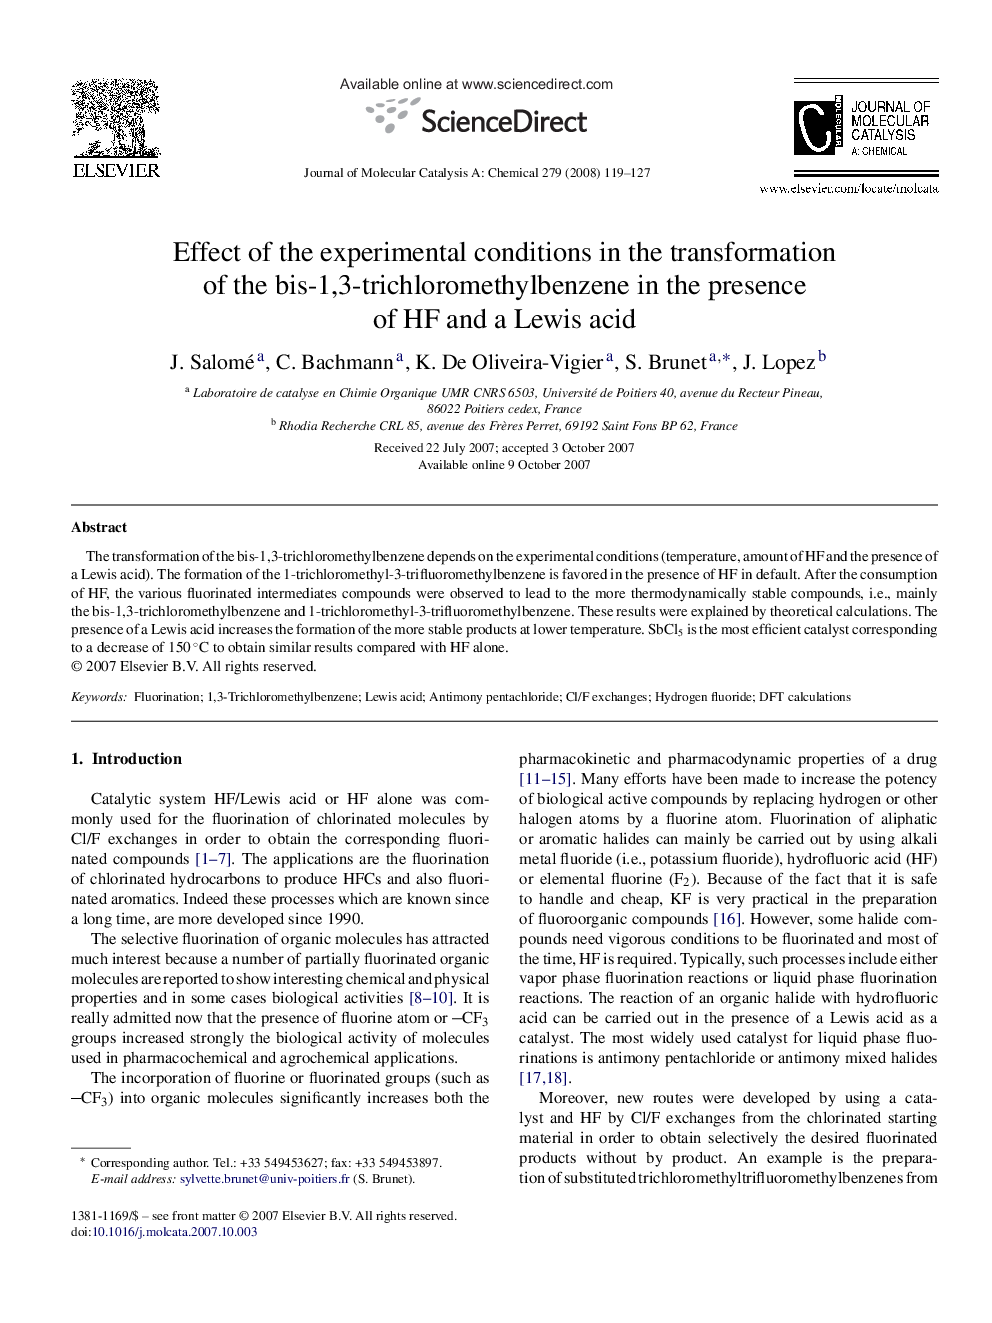 Effect of the experimental conditions in the transformation of the bis-1,3-trichloromethylbenzene in the presence of HF and a Lewis acid